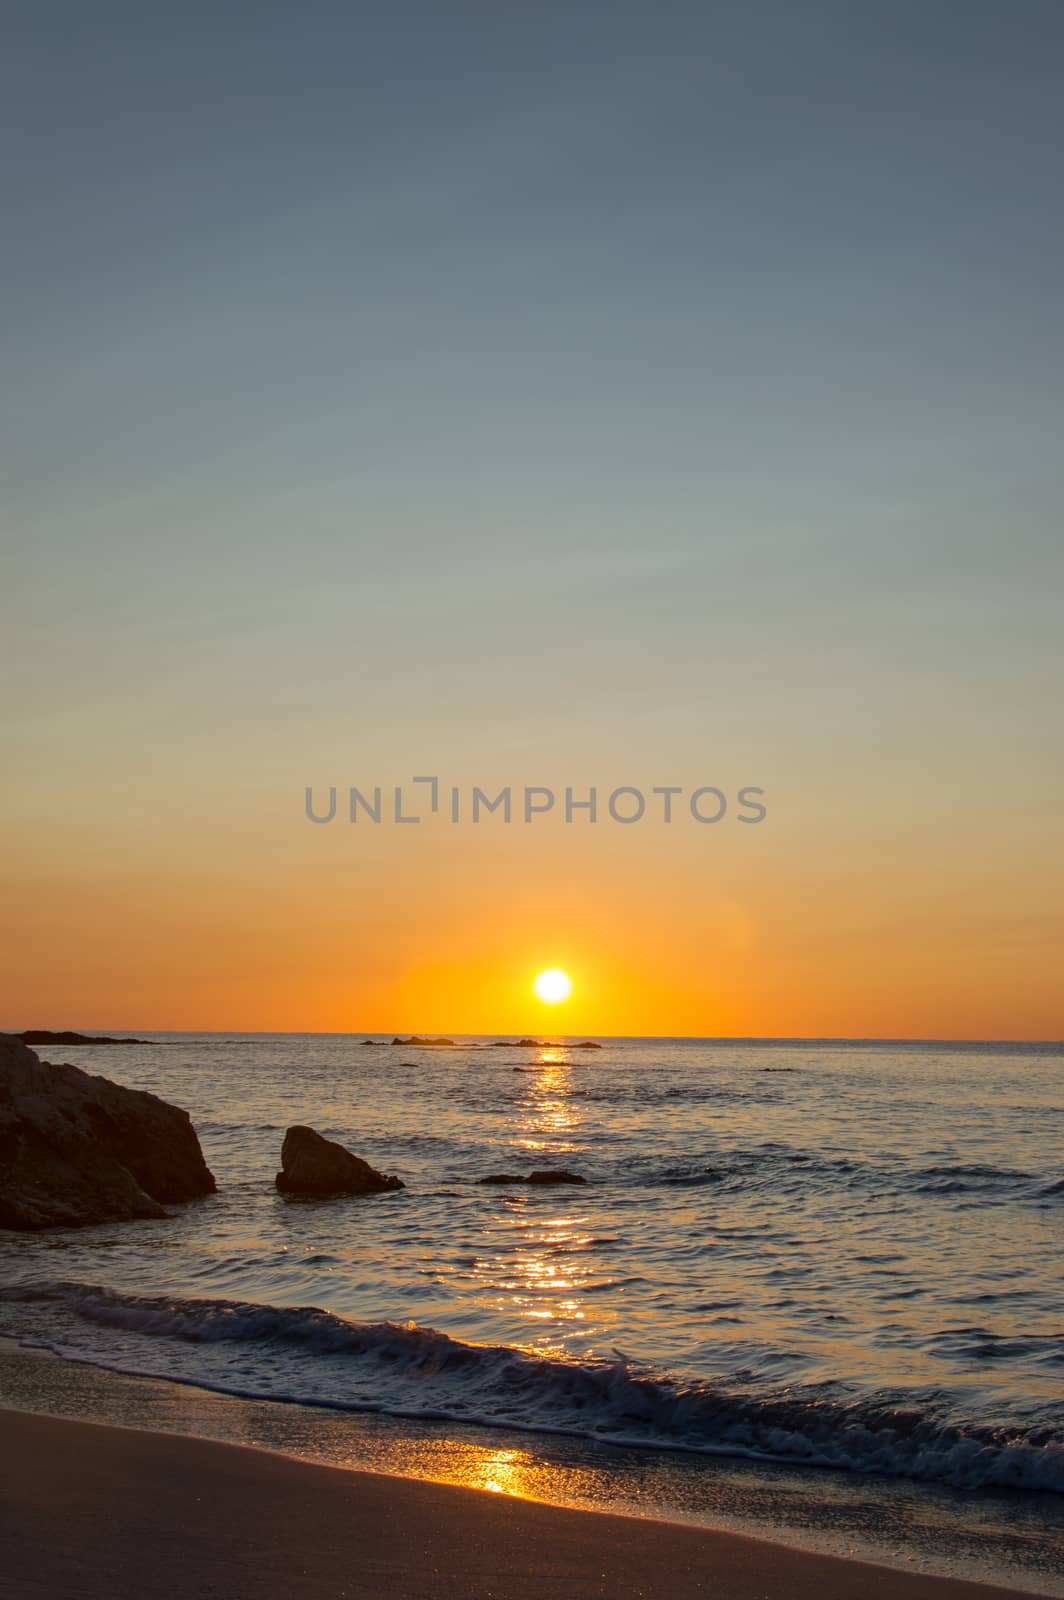 Sunrise in Cala Ginepro by Faurinz